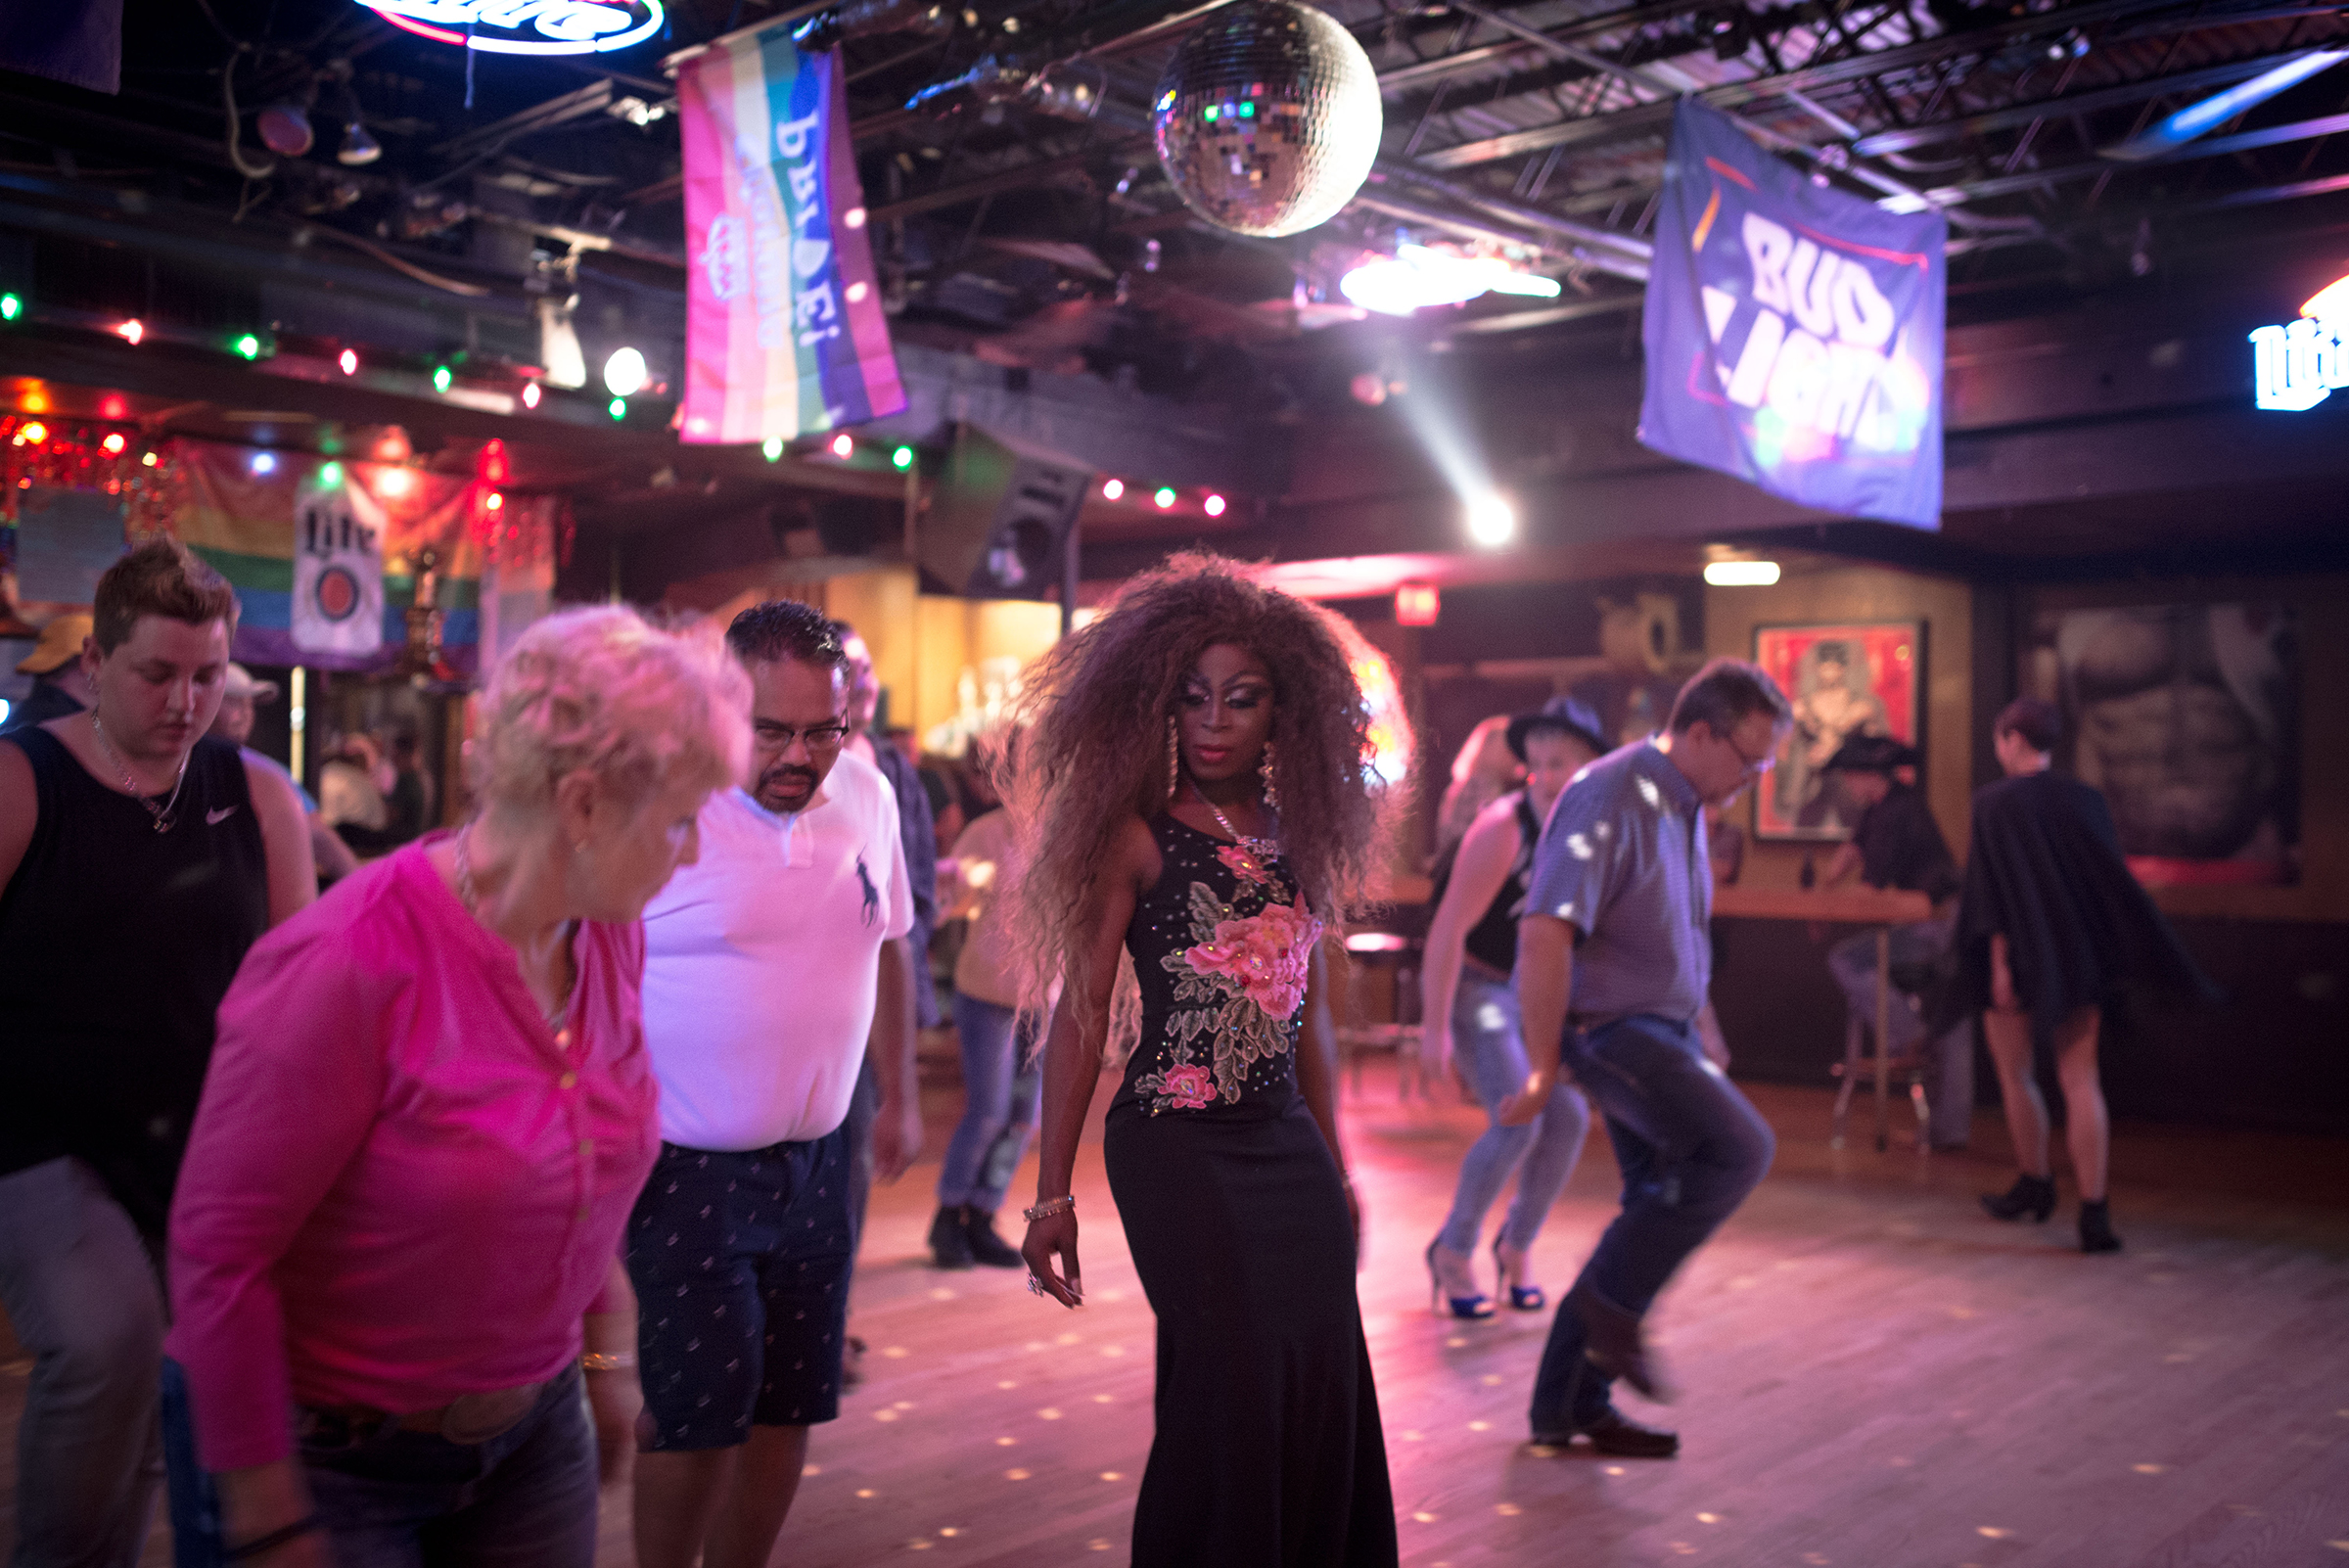 Adoniis Gabrielle, center, line dances at the Finishline in Oklahoma City. (September Dawn Bottoms for TIME)